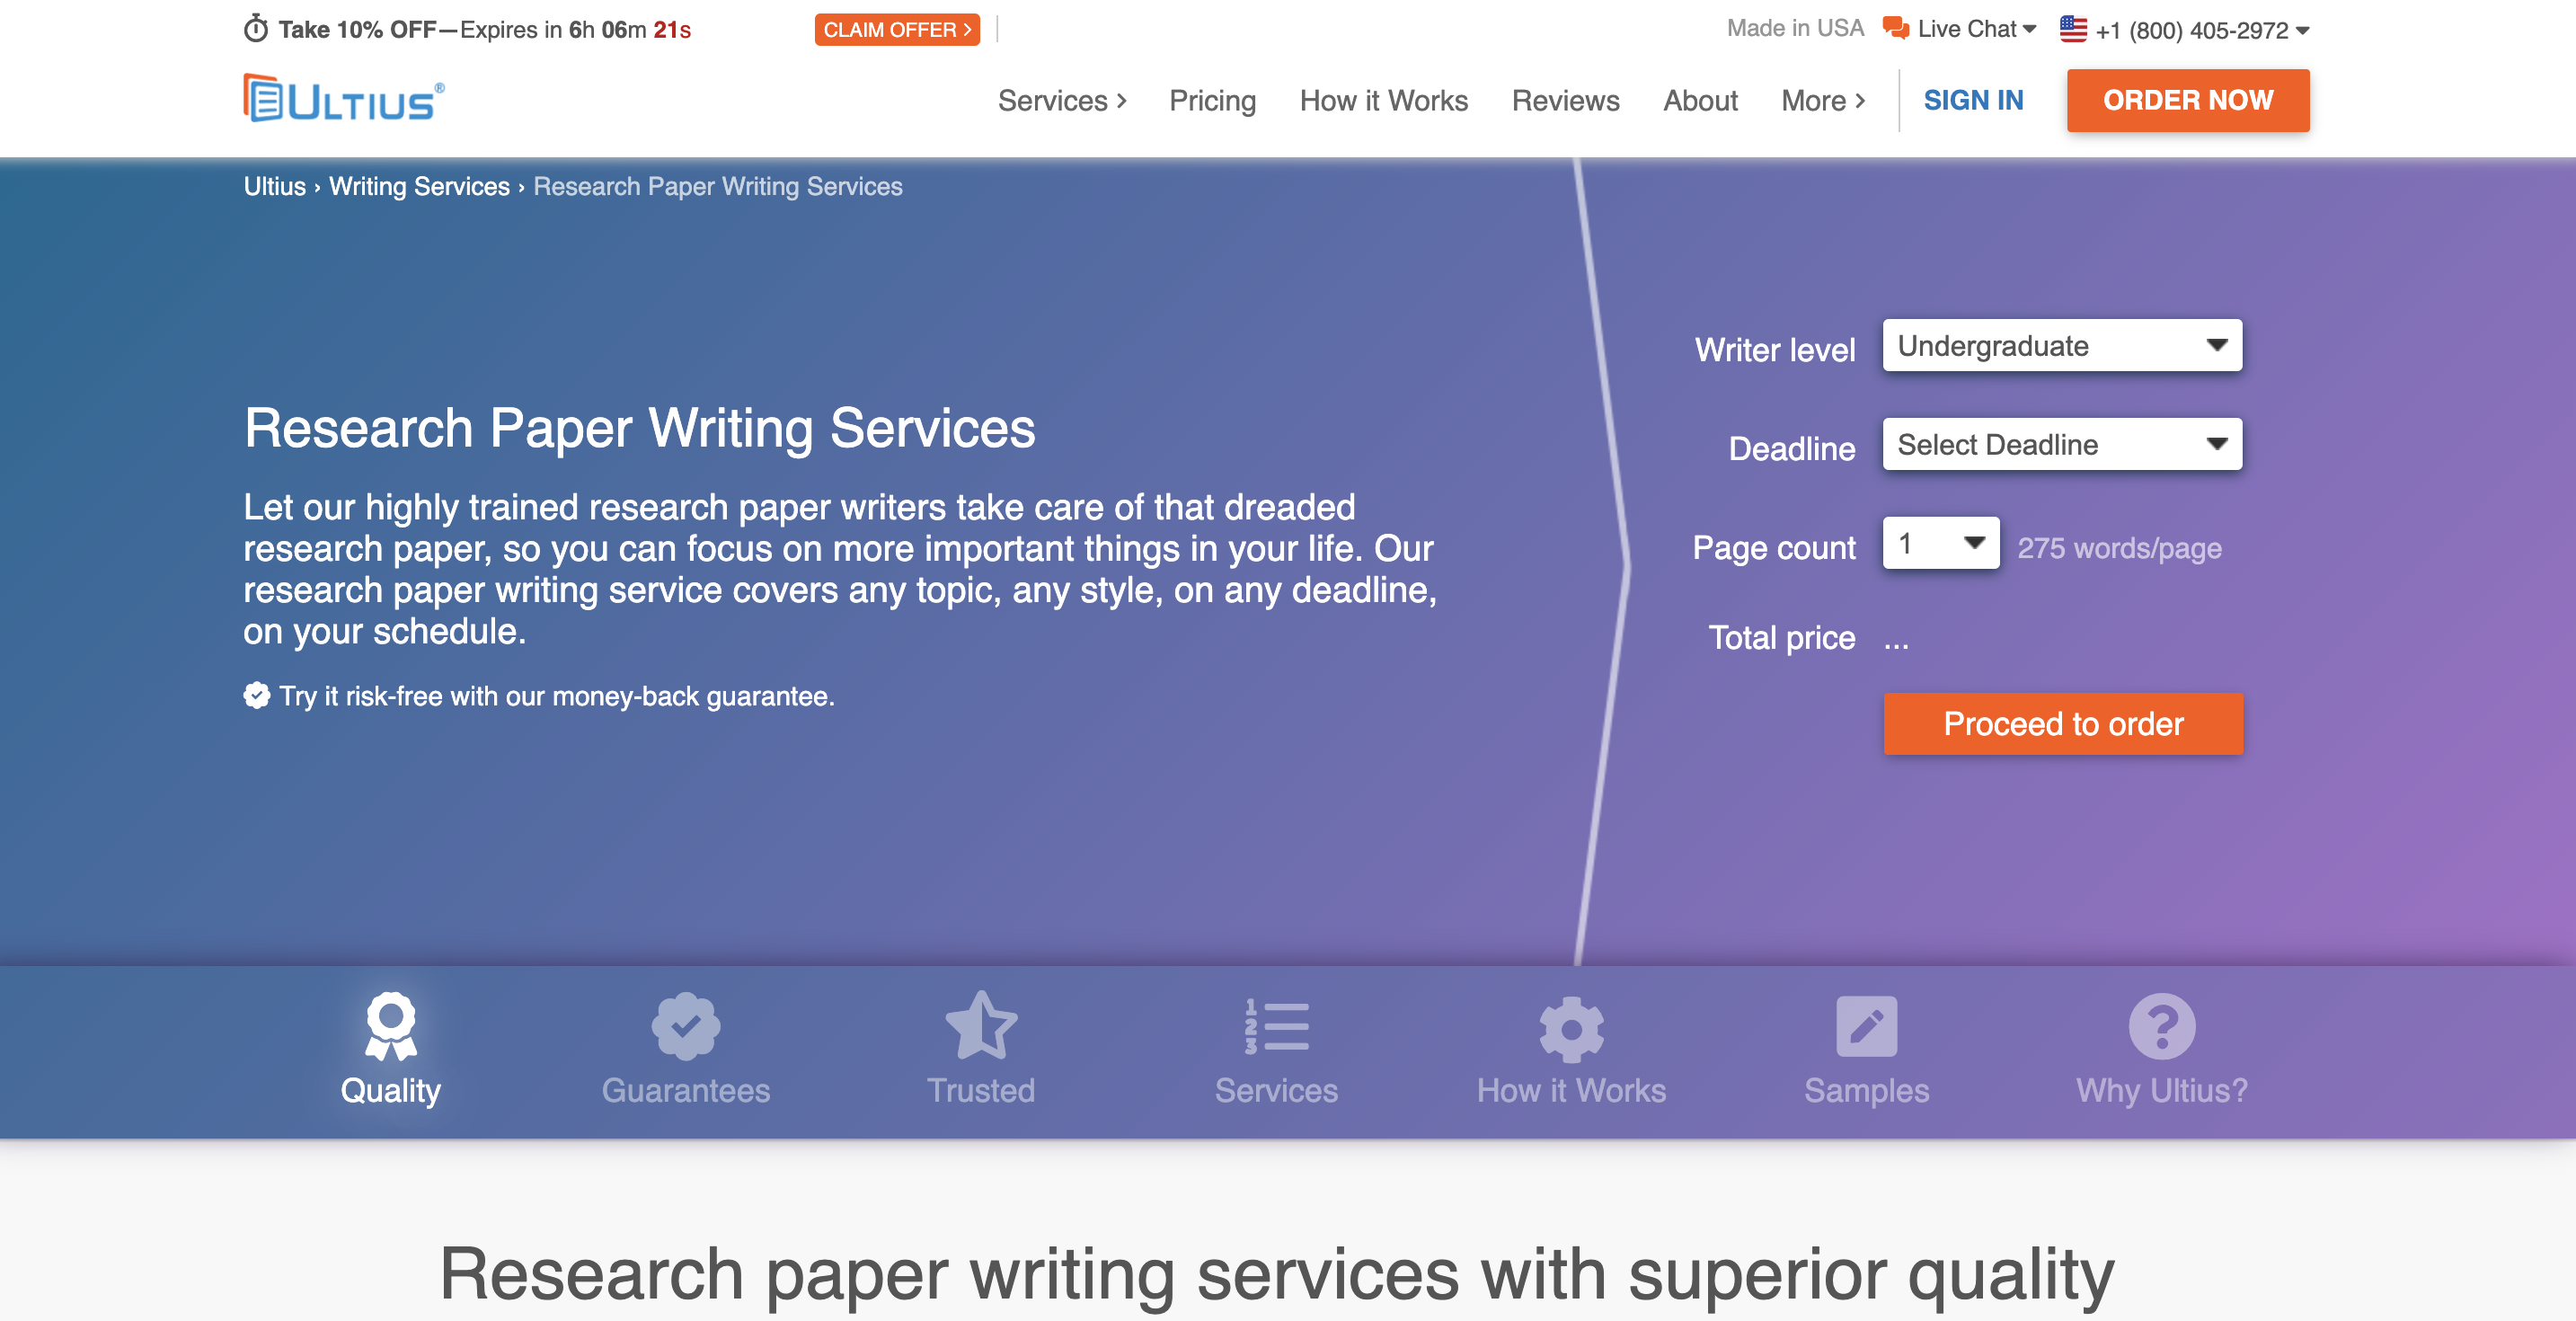 Best Research Paper Writing Services: Top 11 Reviews